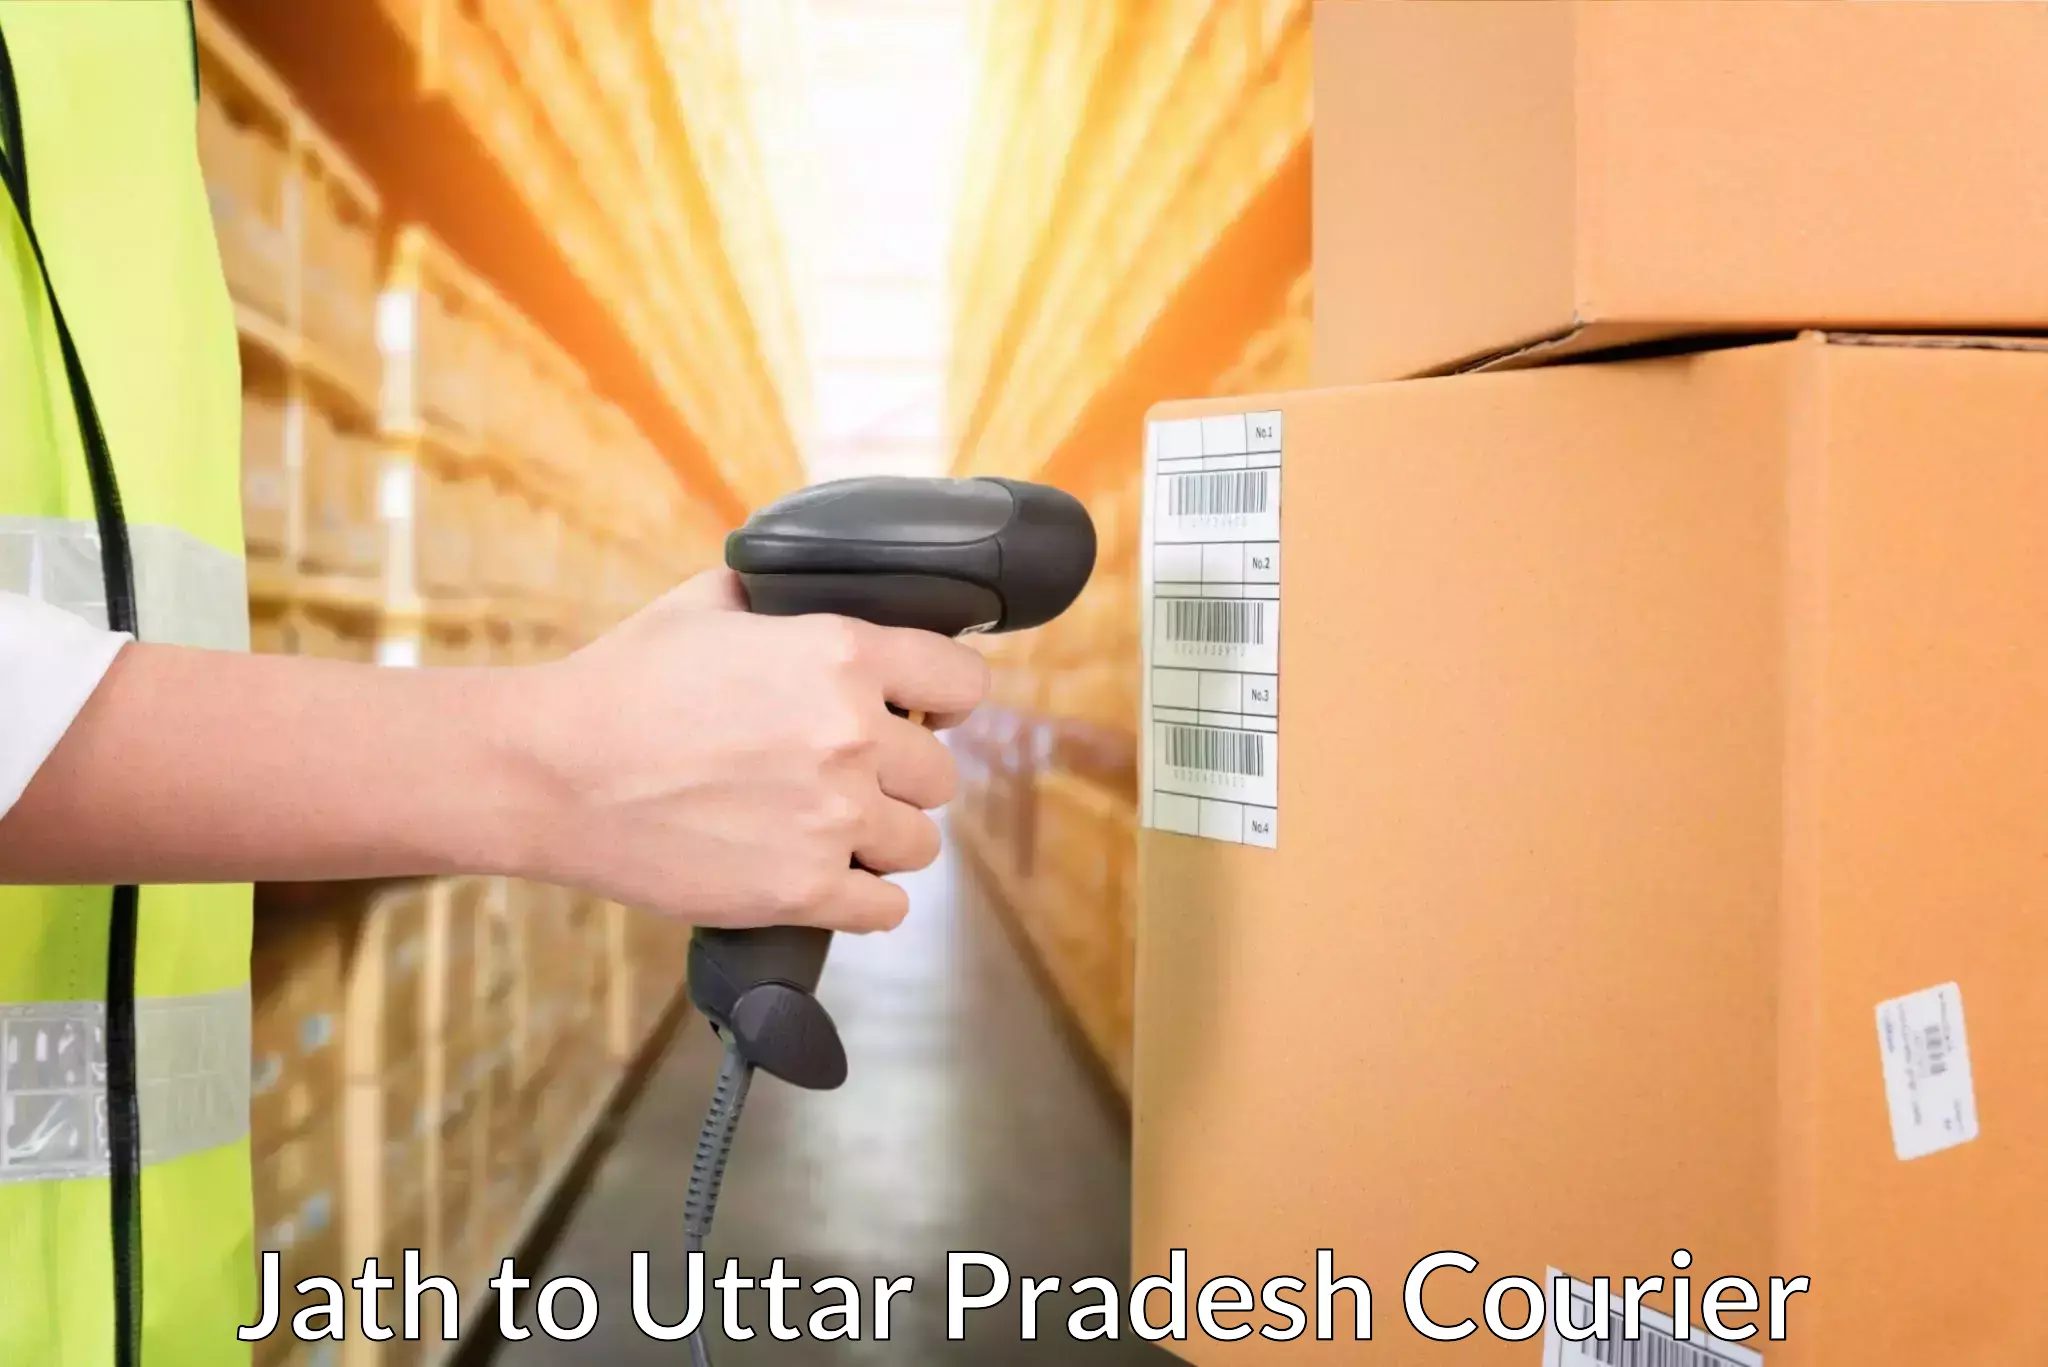 State-of-the-art courier technology Jath to Manjhanpur